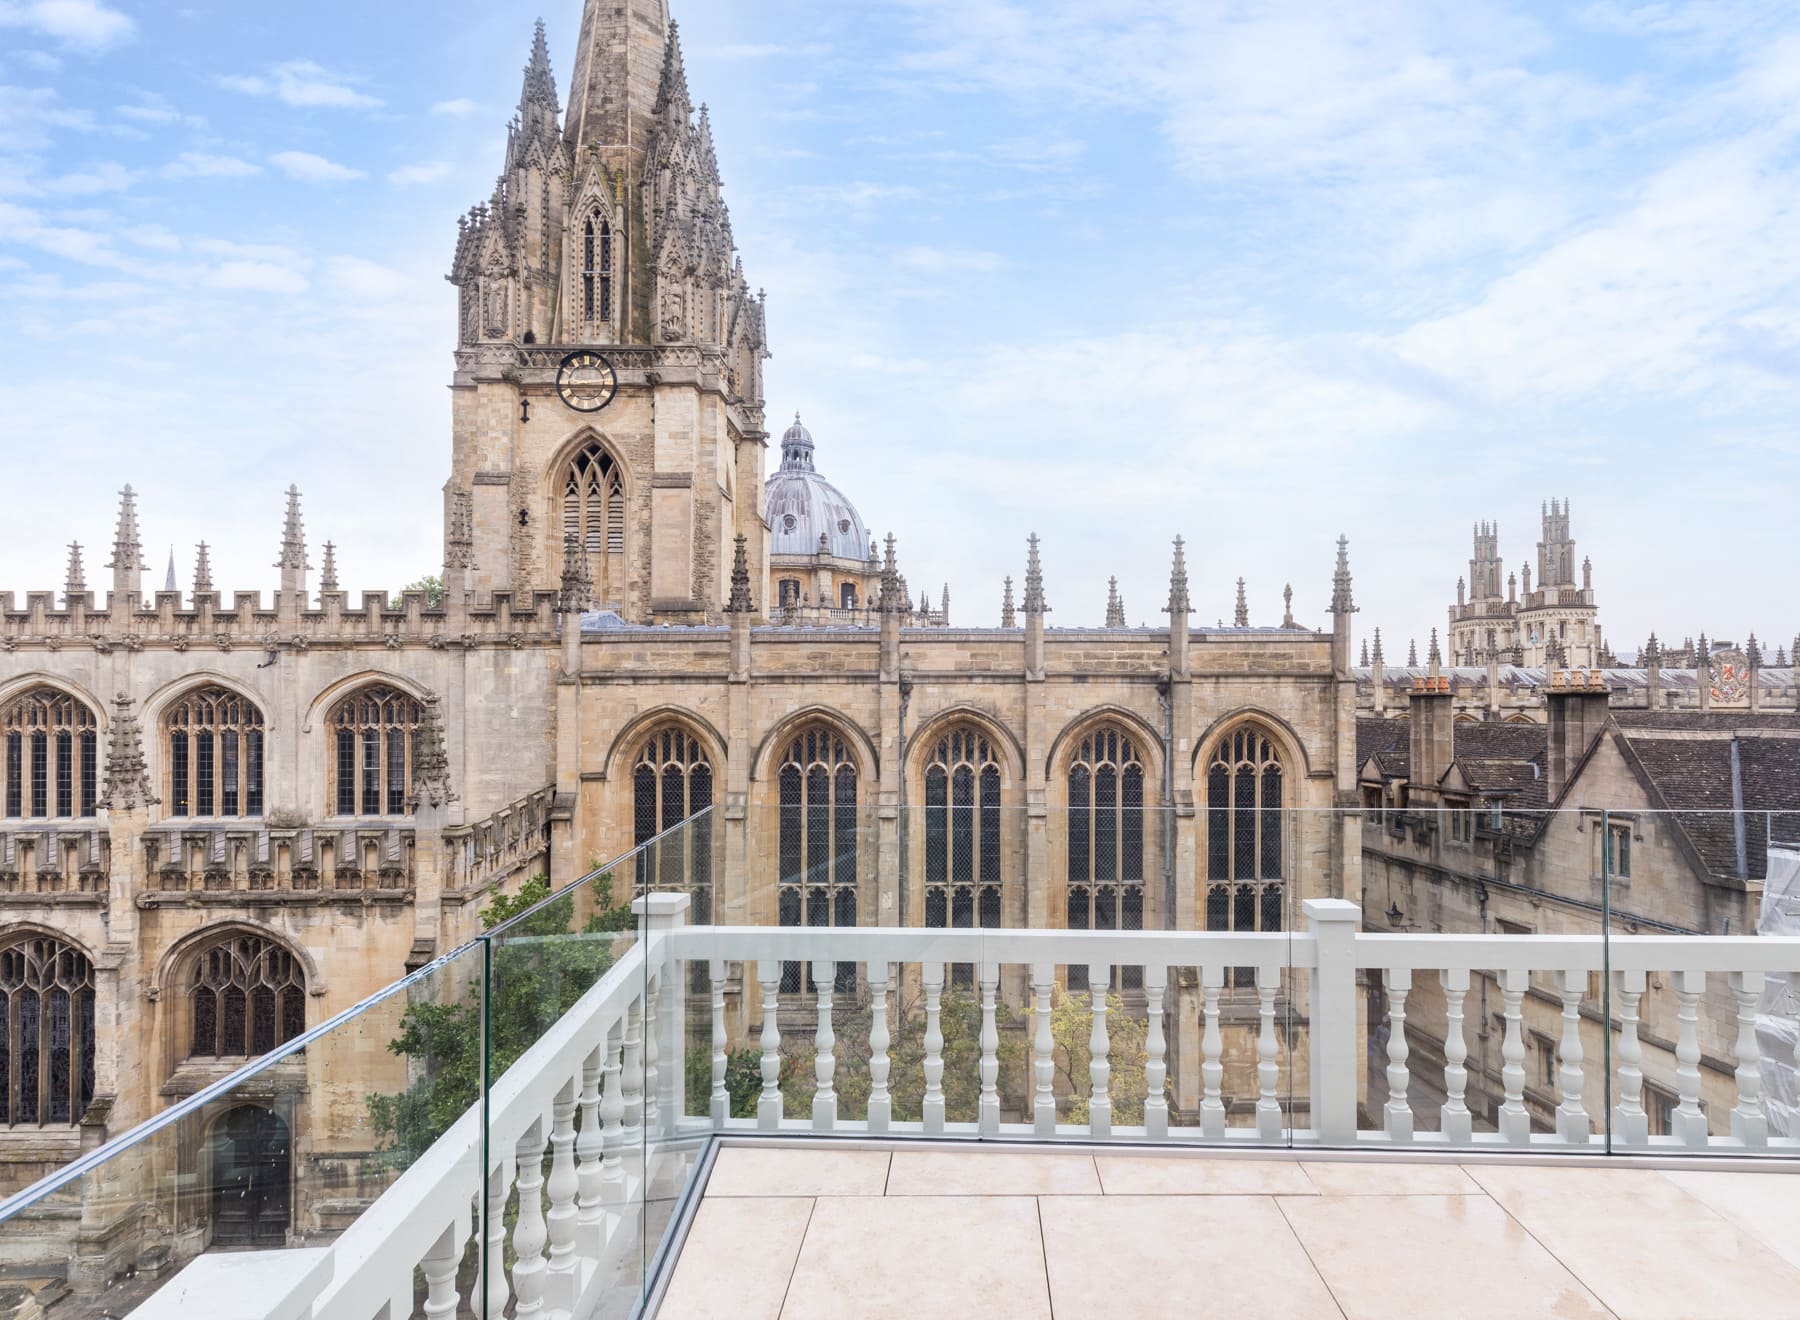 0002 - 2017 - Old Bank Hotel - Oxford - Low Res - Room 1 Balcony View High Street Spires - Web Hero